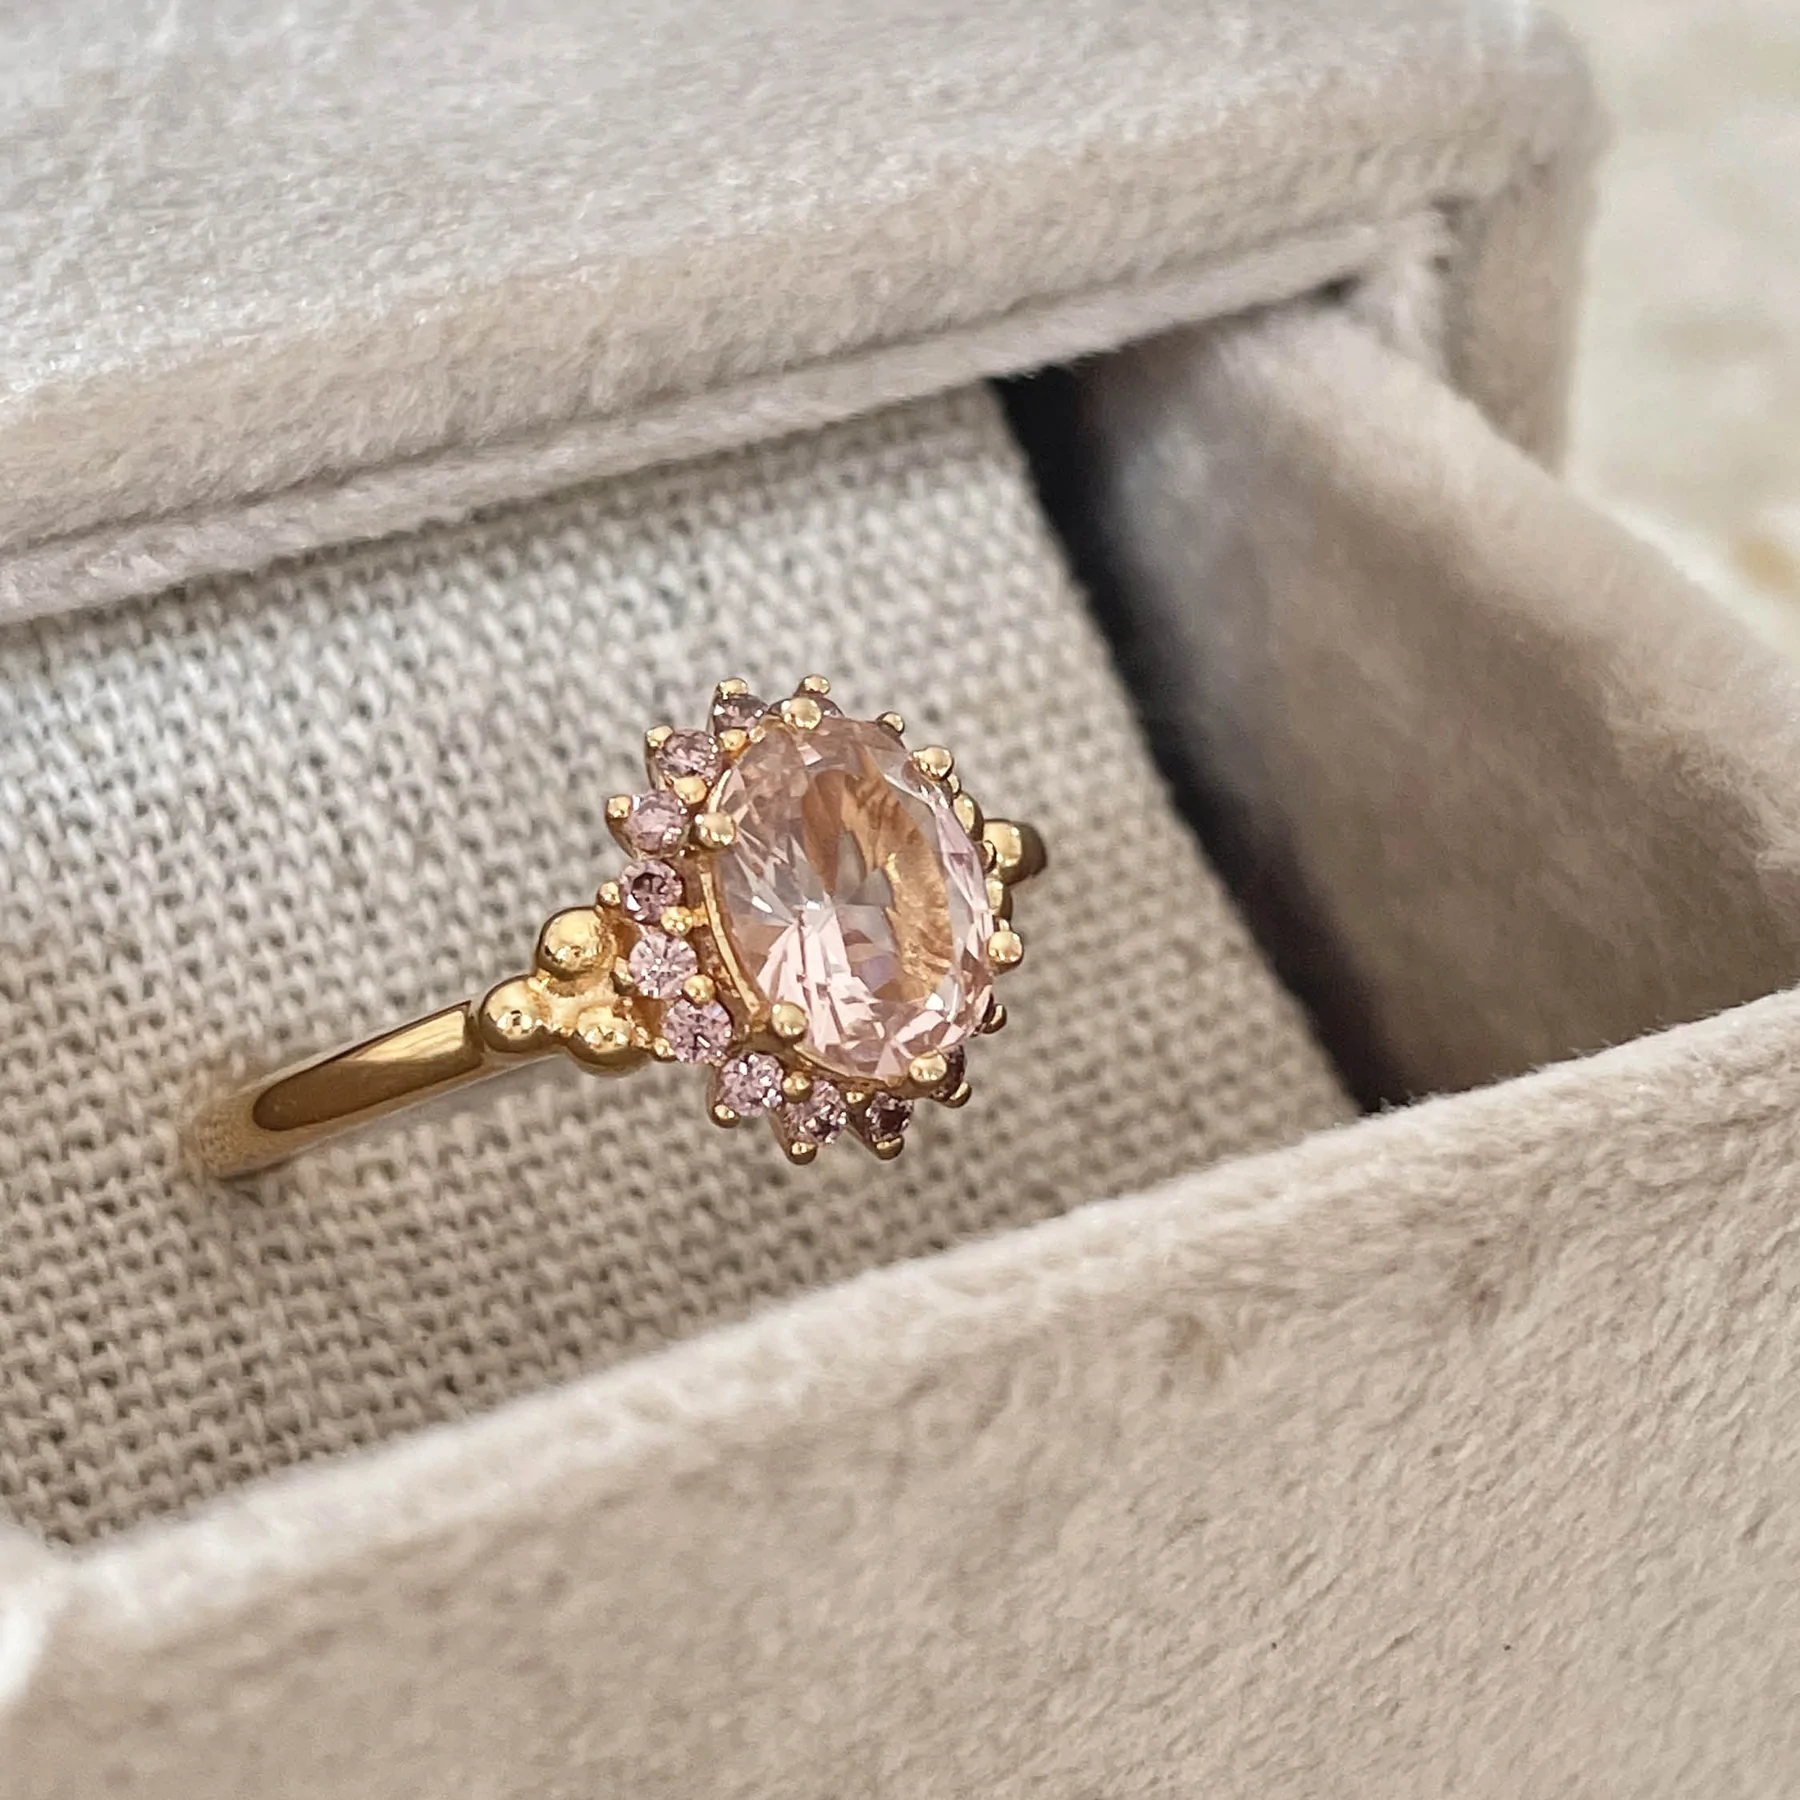 24Kae Gold Ring with Pink Stones